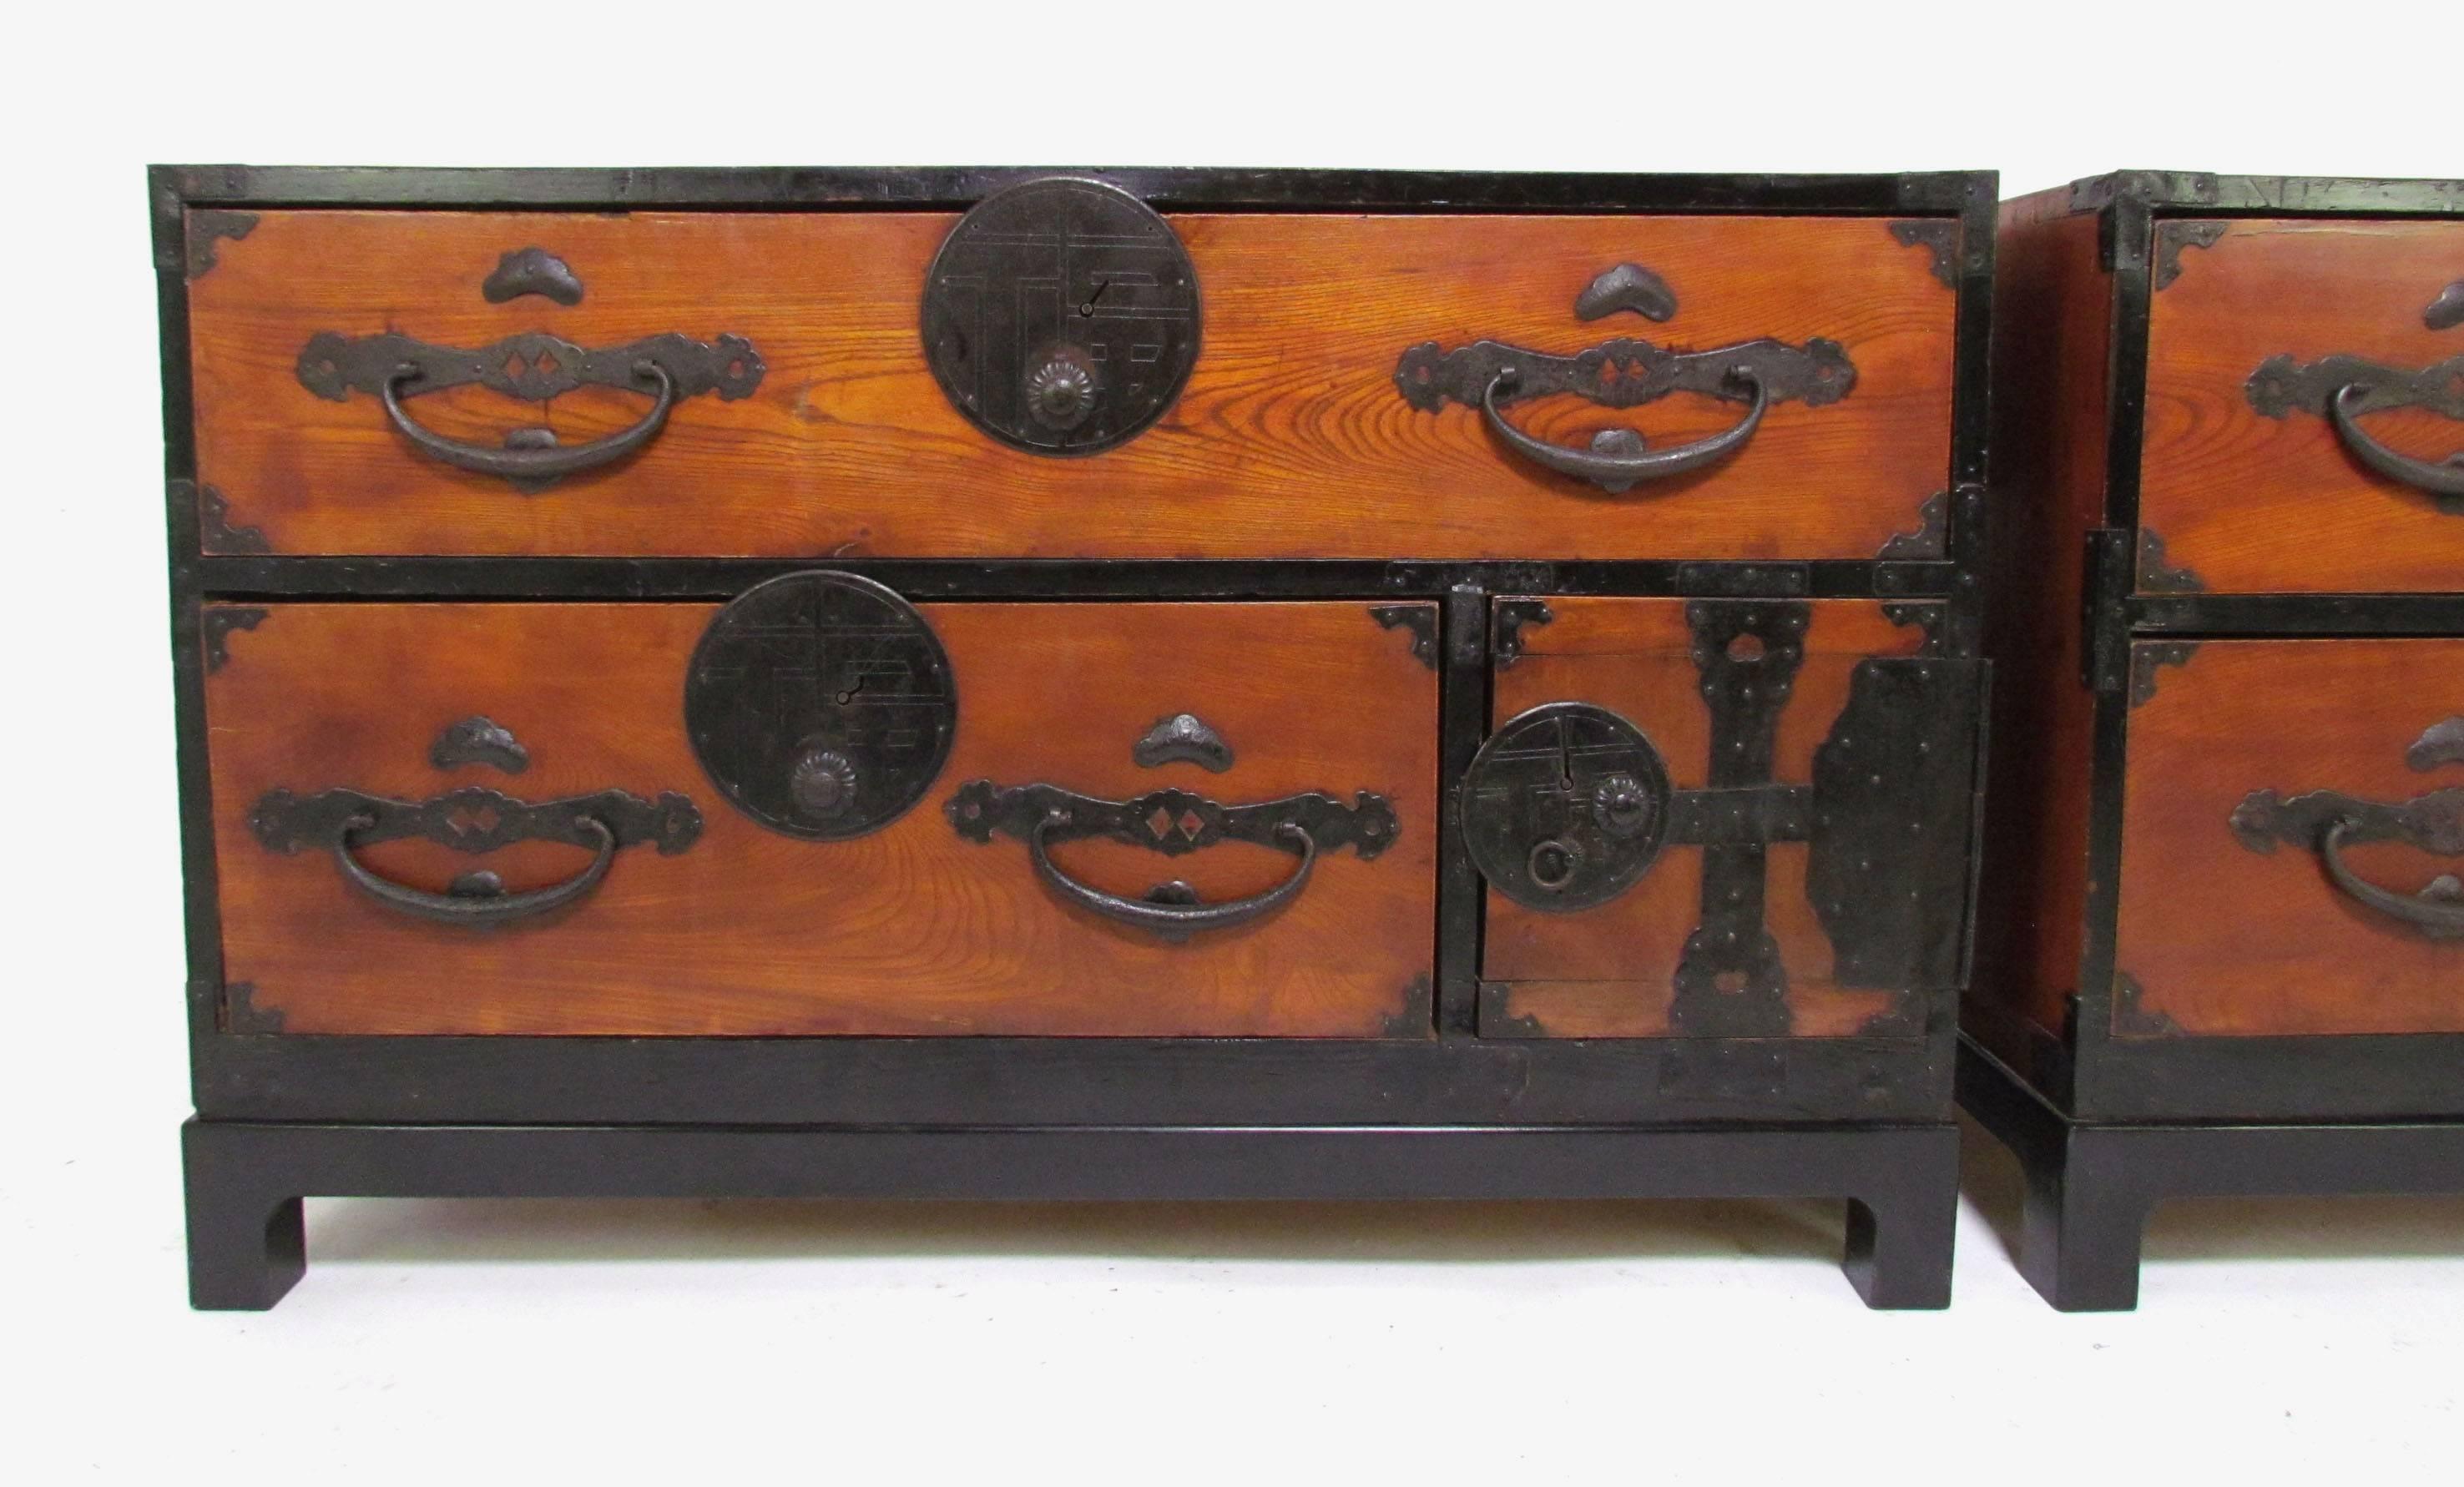 Pair of antique late 19th century Meiji period lacquered Tansu chests. Originally a two part stacking chest, these were modified in the mid-20th Century as flanking chests and fitted with custom ebonized bases. Intricate hand-forged iron hardware